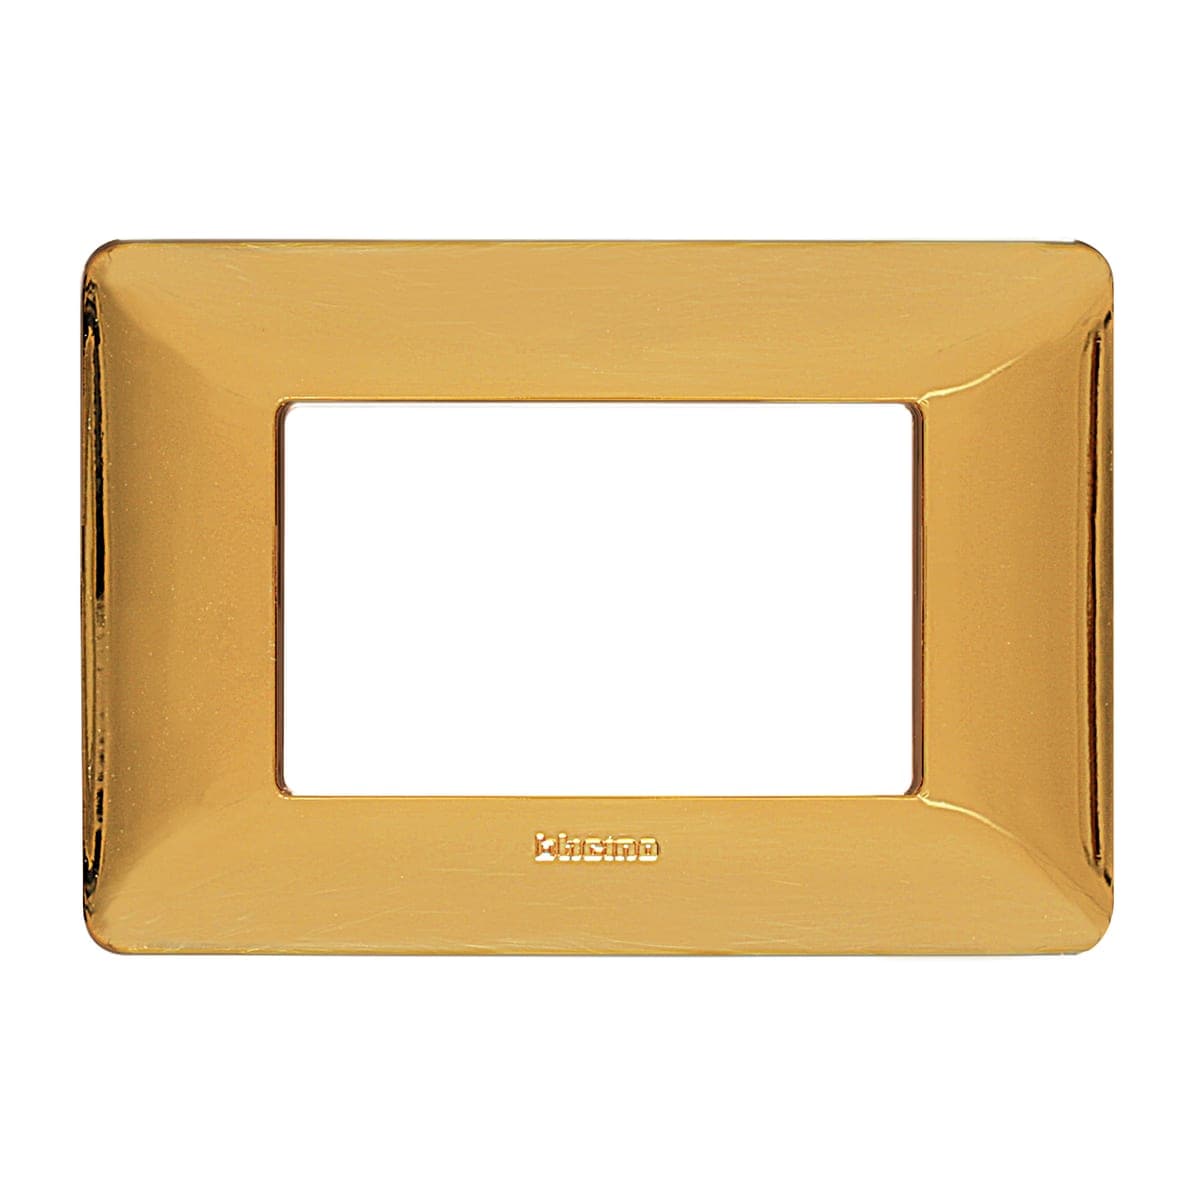 MATIX PLATE 3 PLACES POLISHED GOLD - best price from Maltashopper.com BR420100039